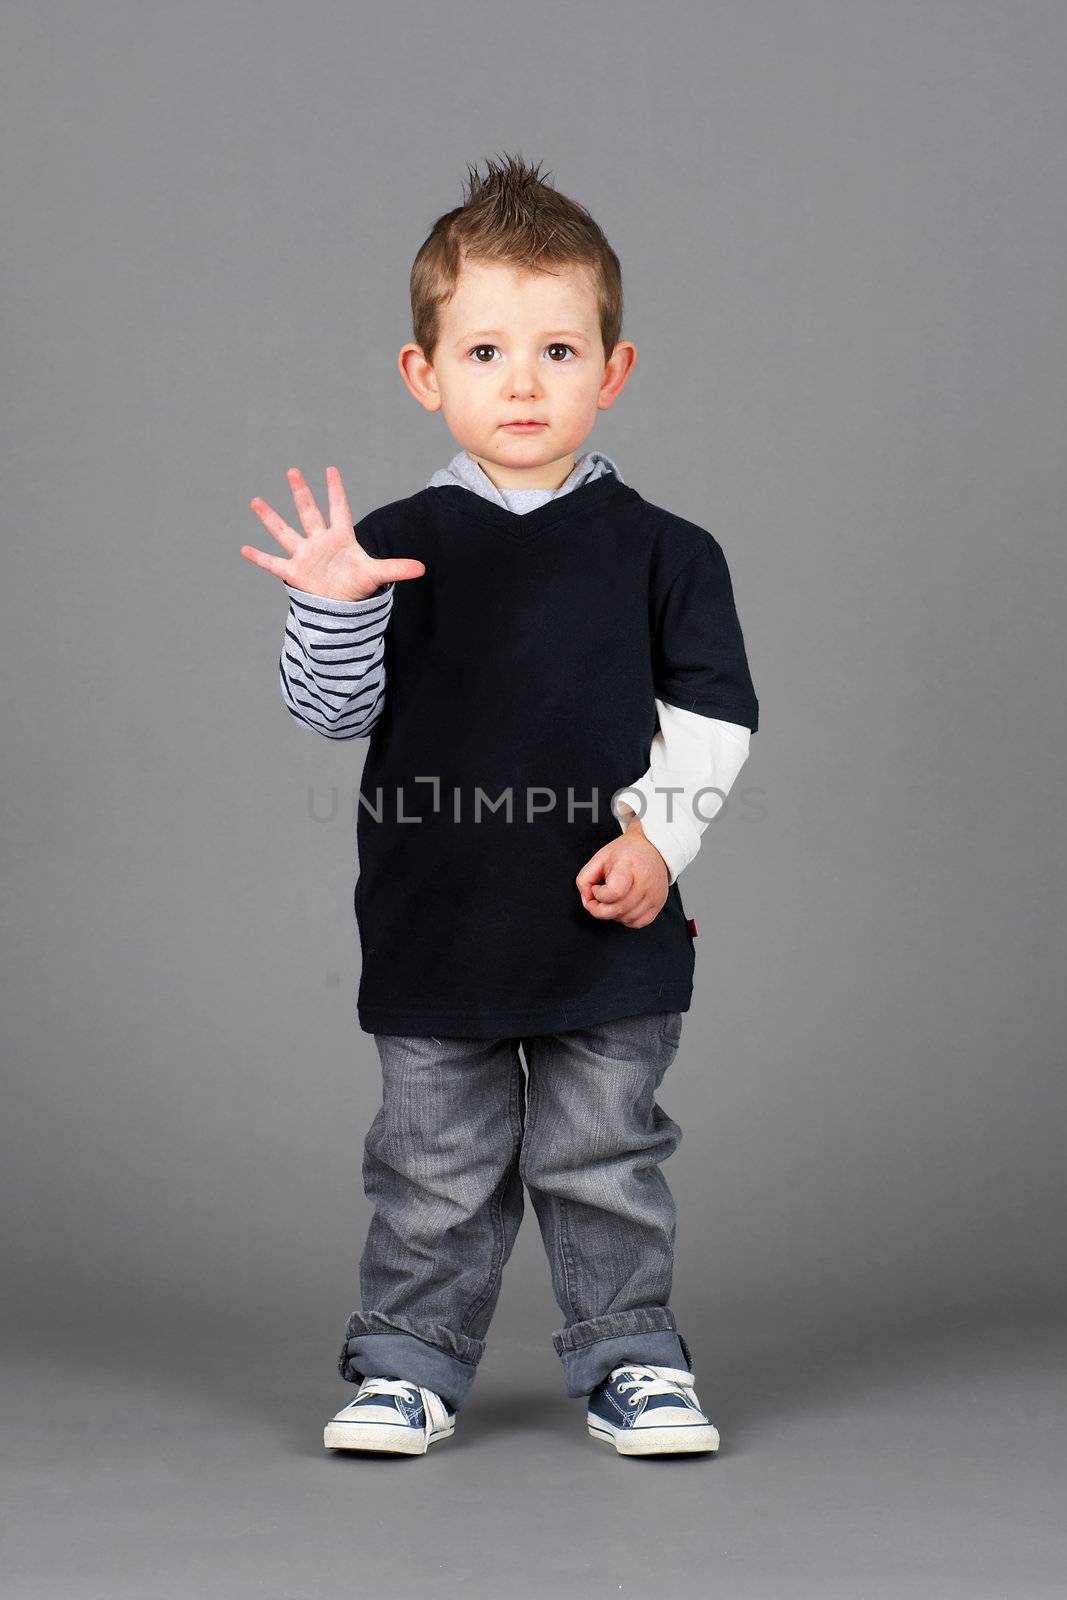 Cute and hip little boy wearing jeans and running shoes waving hello or showing fingers to count, shot in studio over grey background.